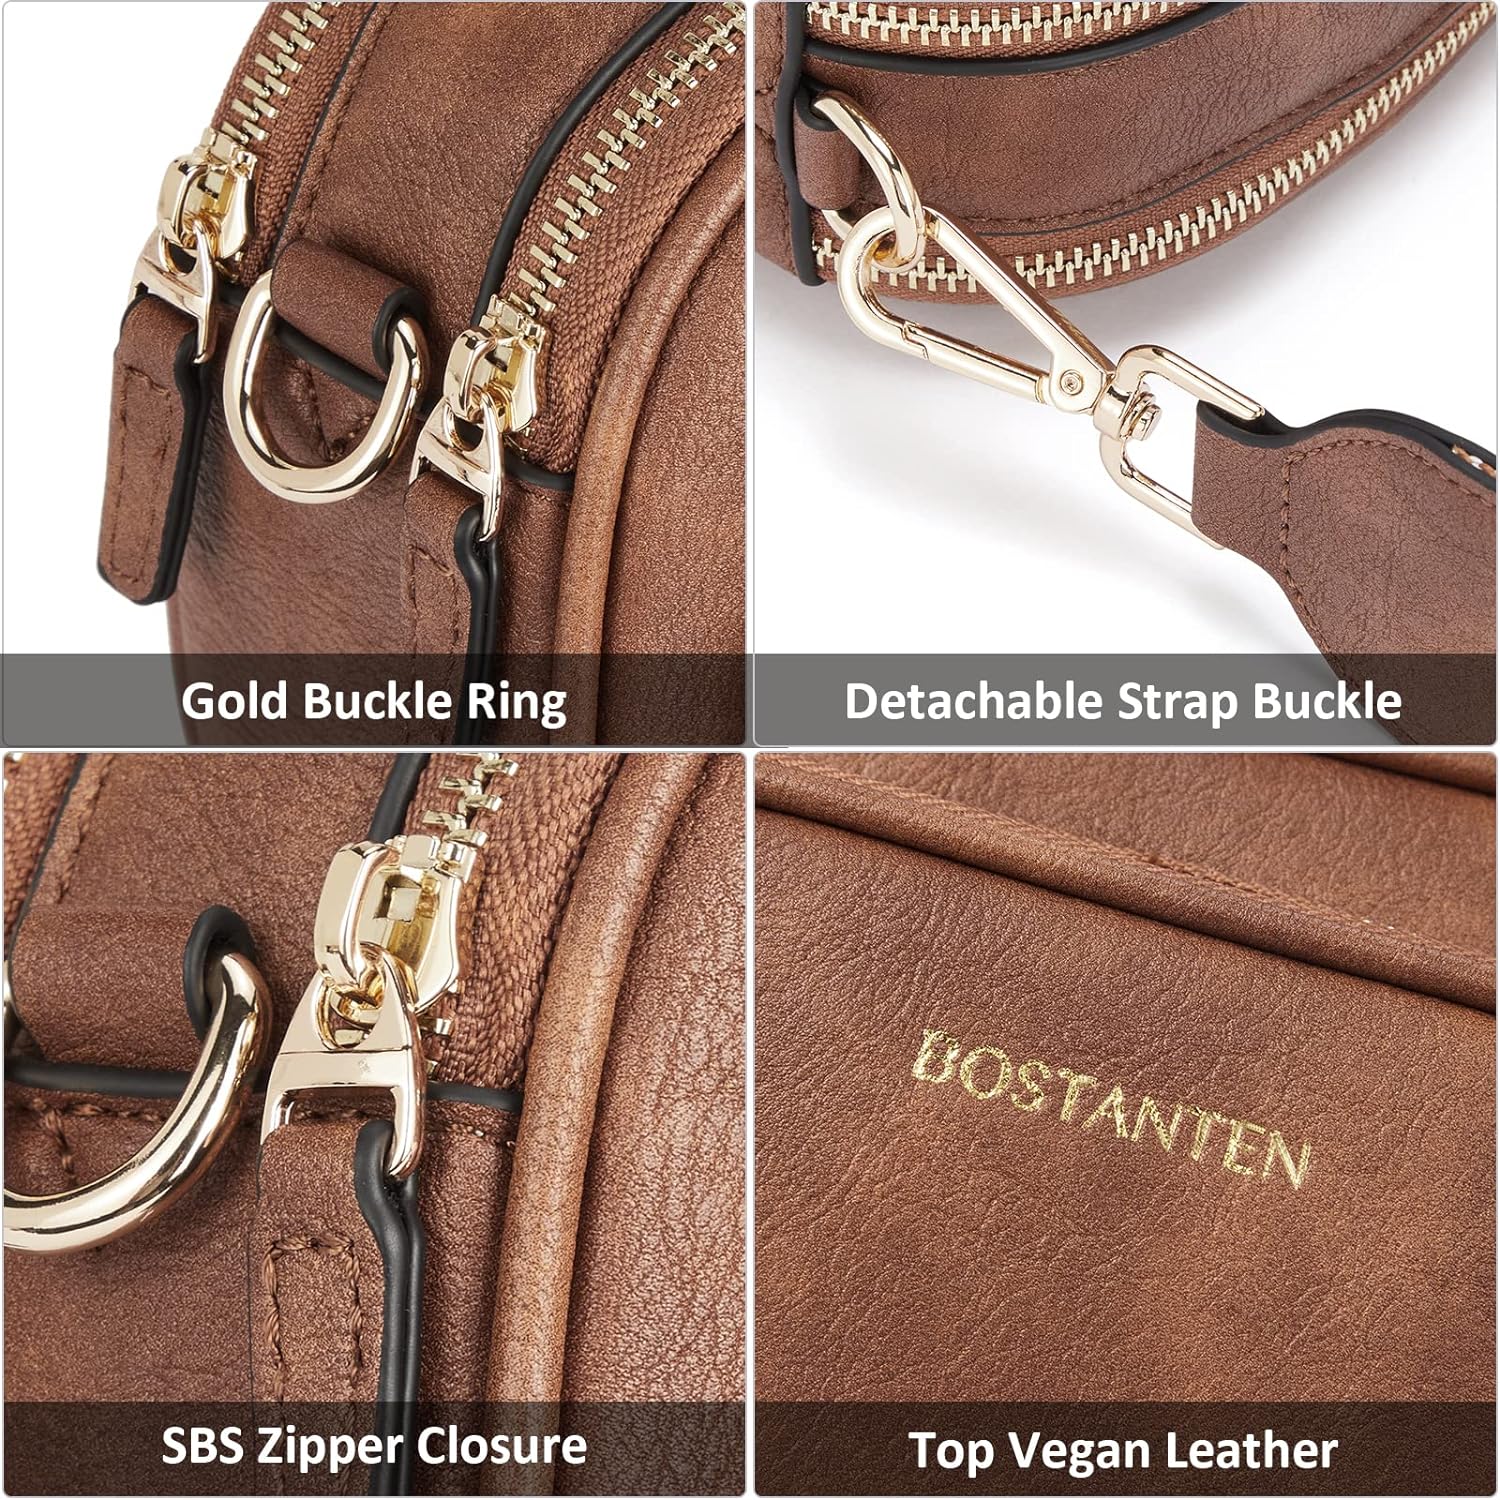 Generic BOSTANTEN Crossbody Bags for Women Leather Cell Phone Purse Shoulder Handbags with Wide Strap